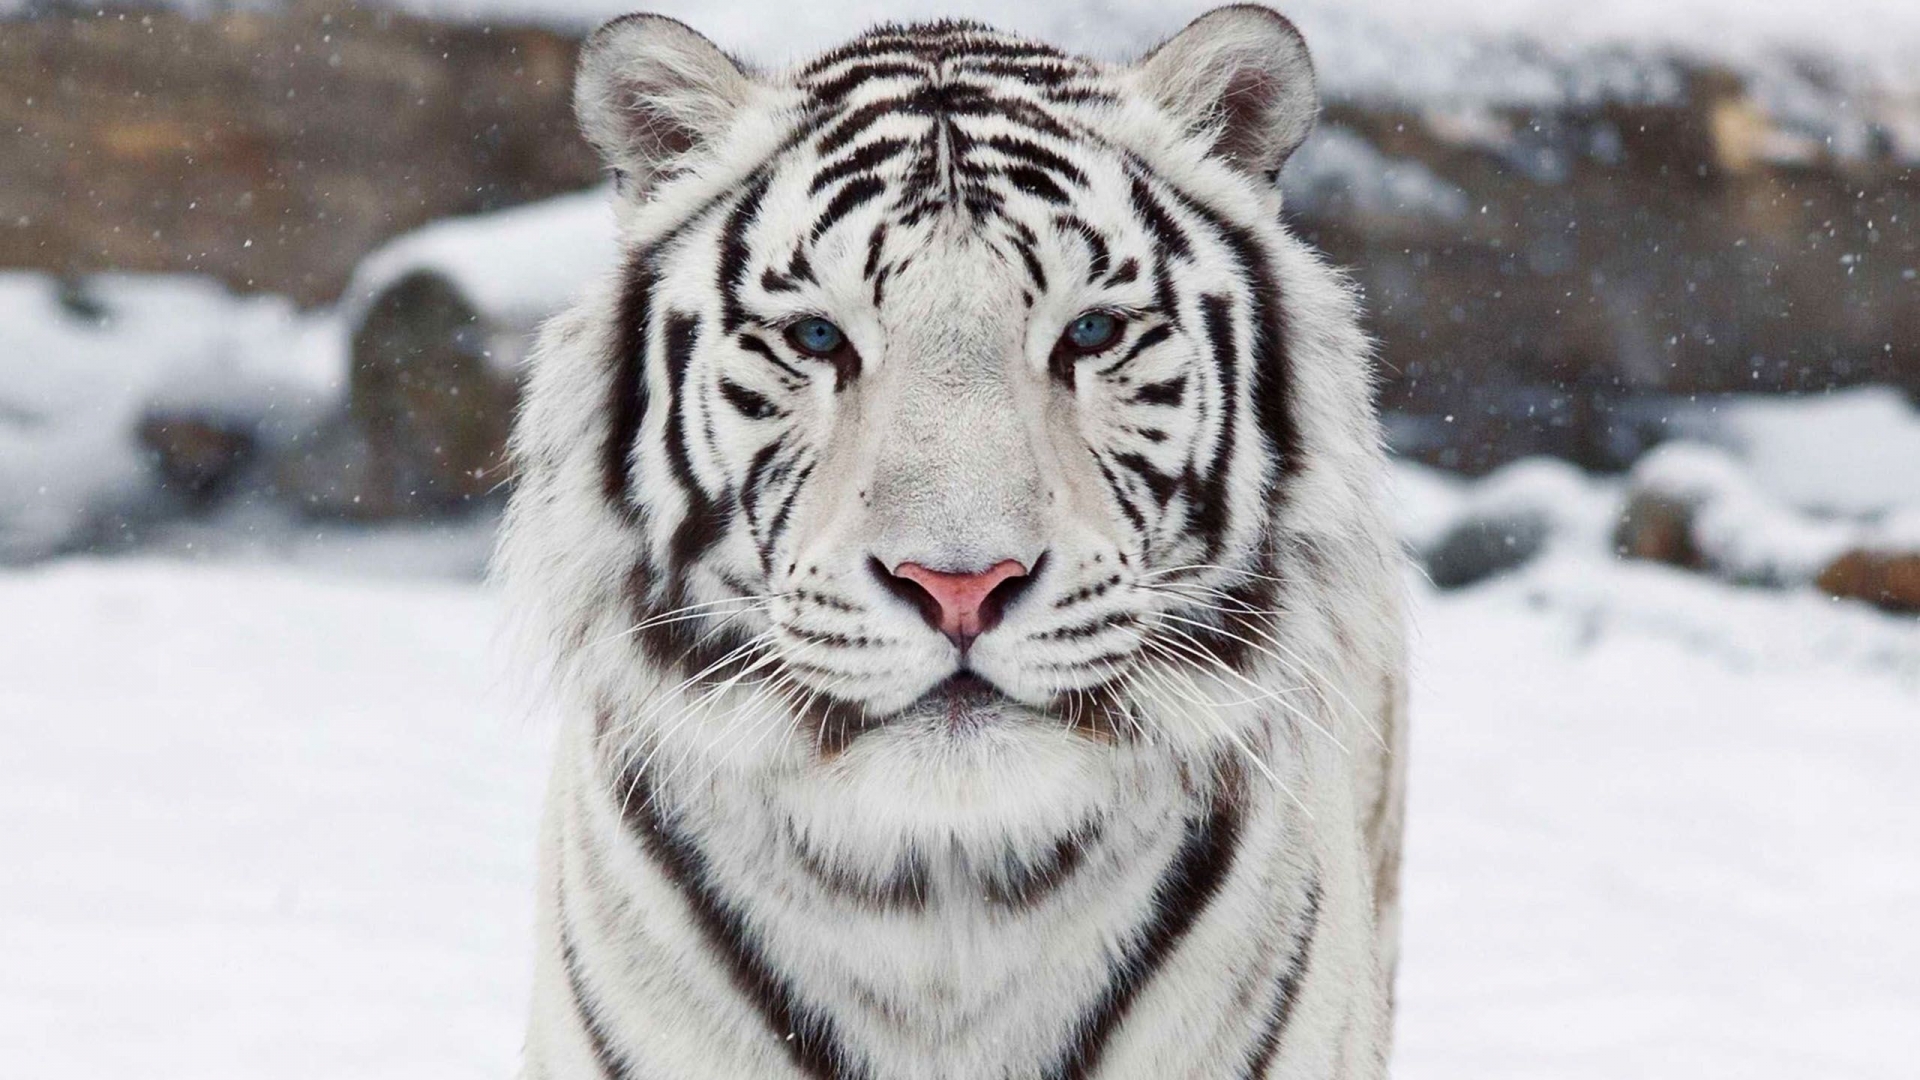 Top 10 Most Beautiful Animals in the World